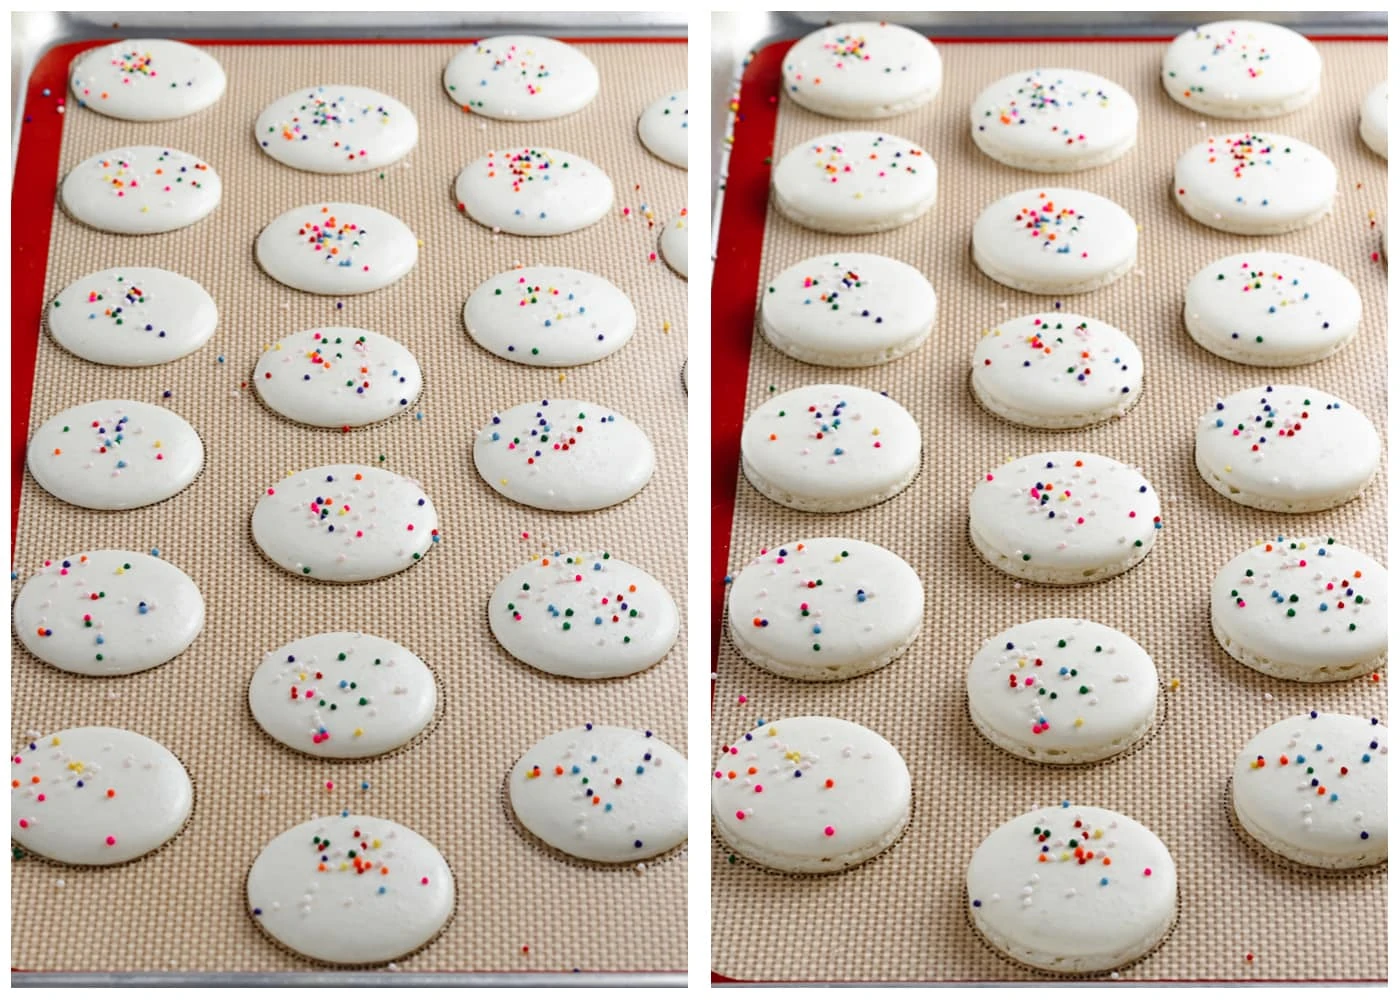 Piped and Baked Macarons